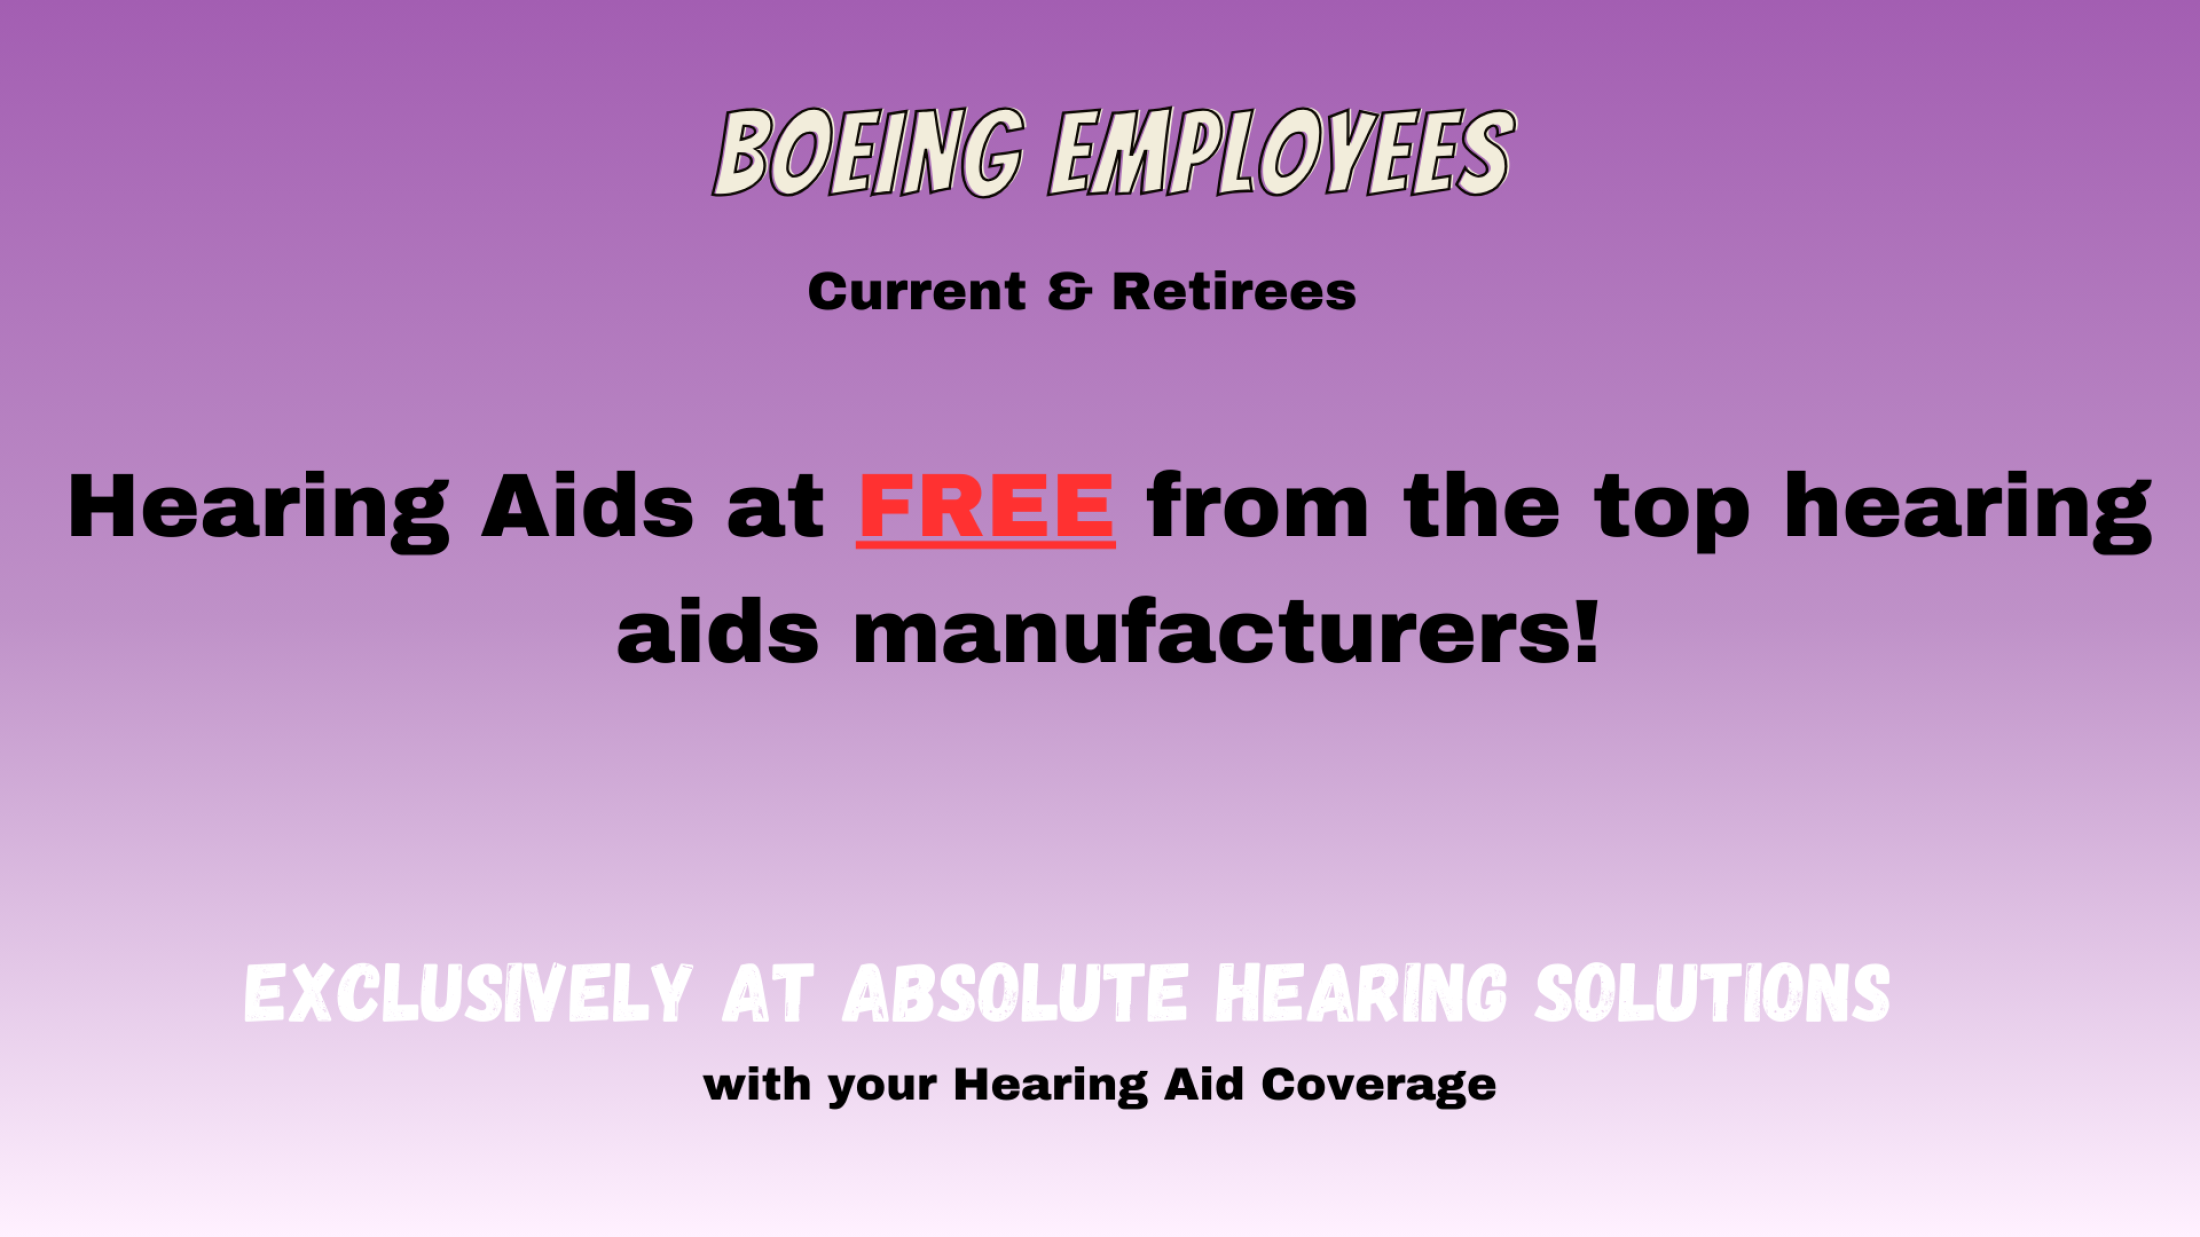 Boeing Employees qualify for FREE hearing aids